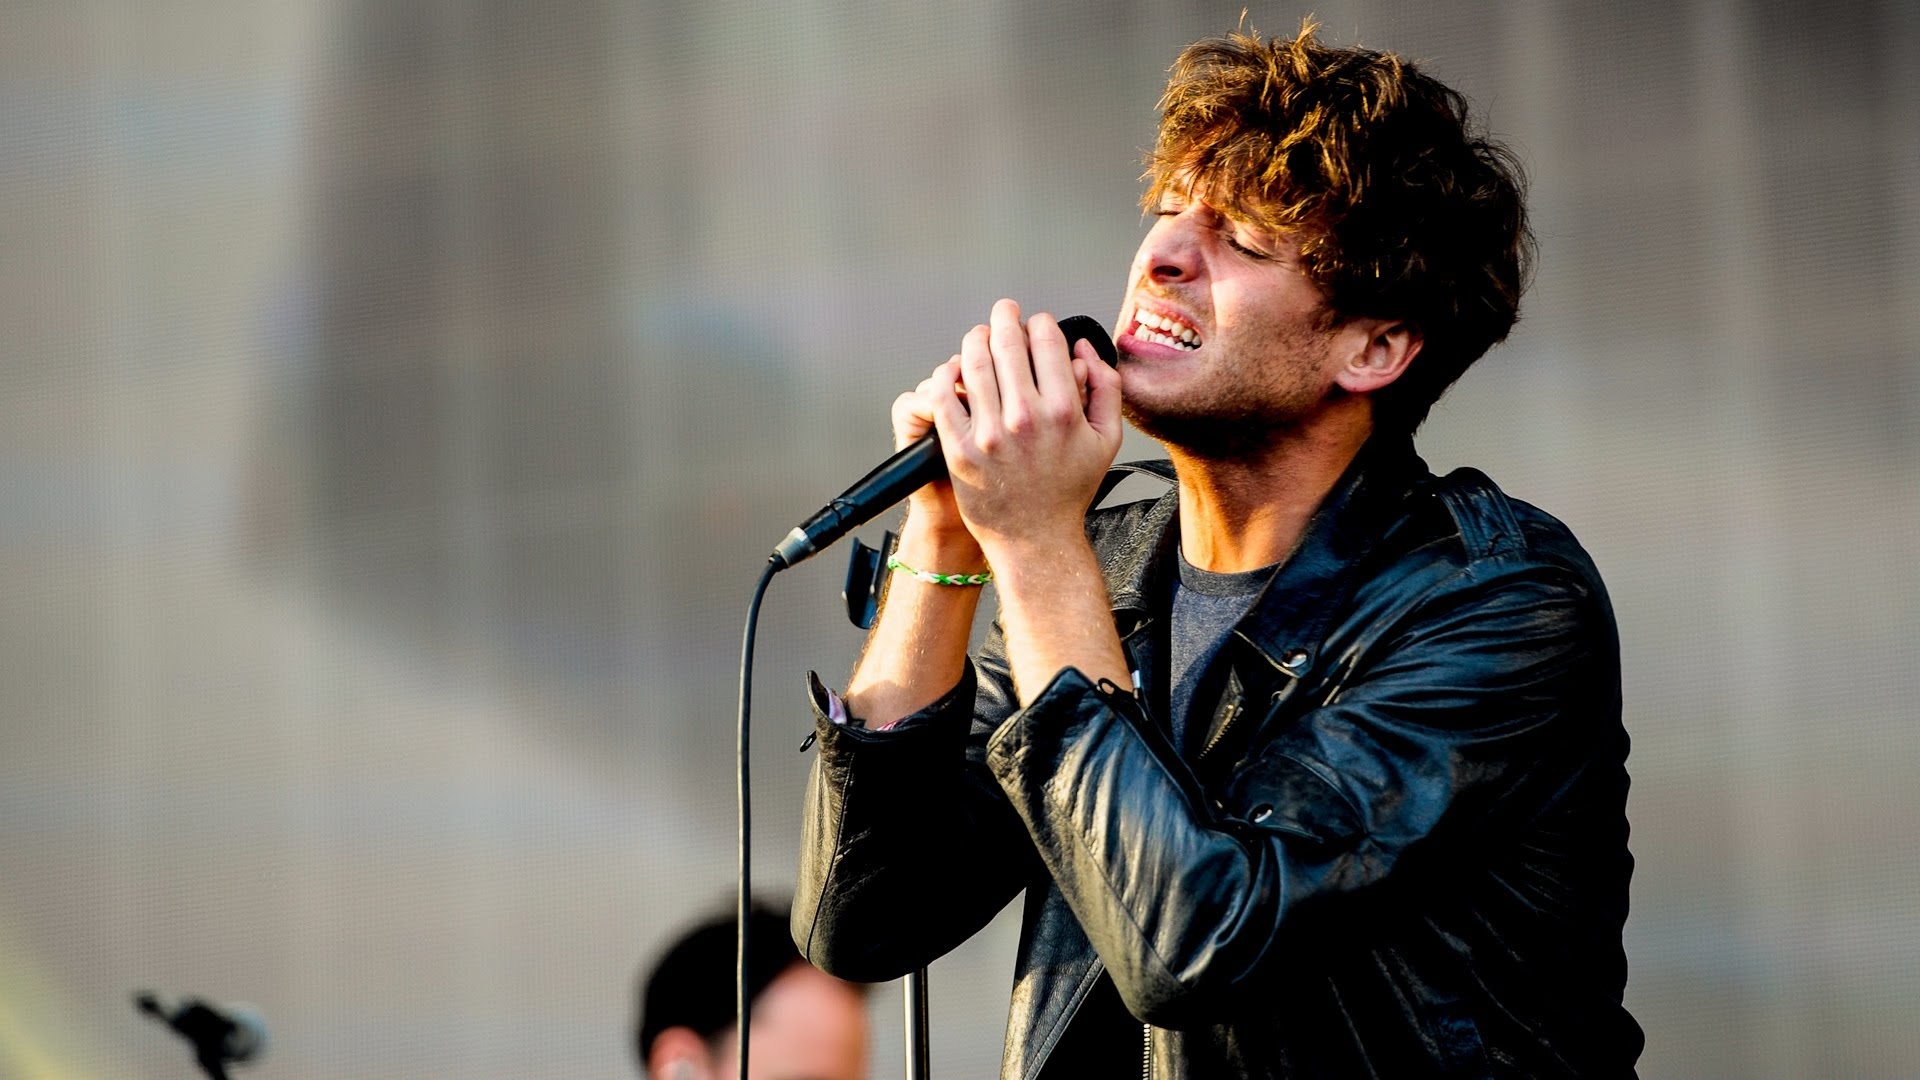 Paolo Nutini, Wallpaper HQ, Music pictures, 4K wallpapers, 1920x1080 Full HD Desktop